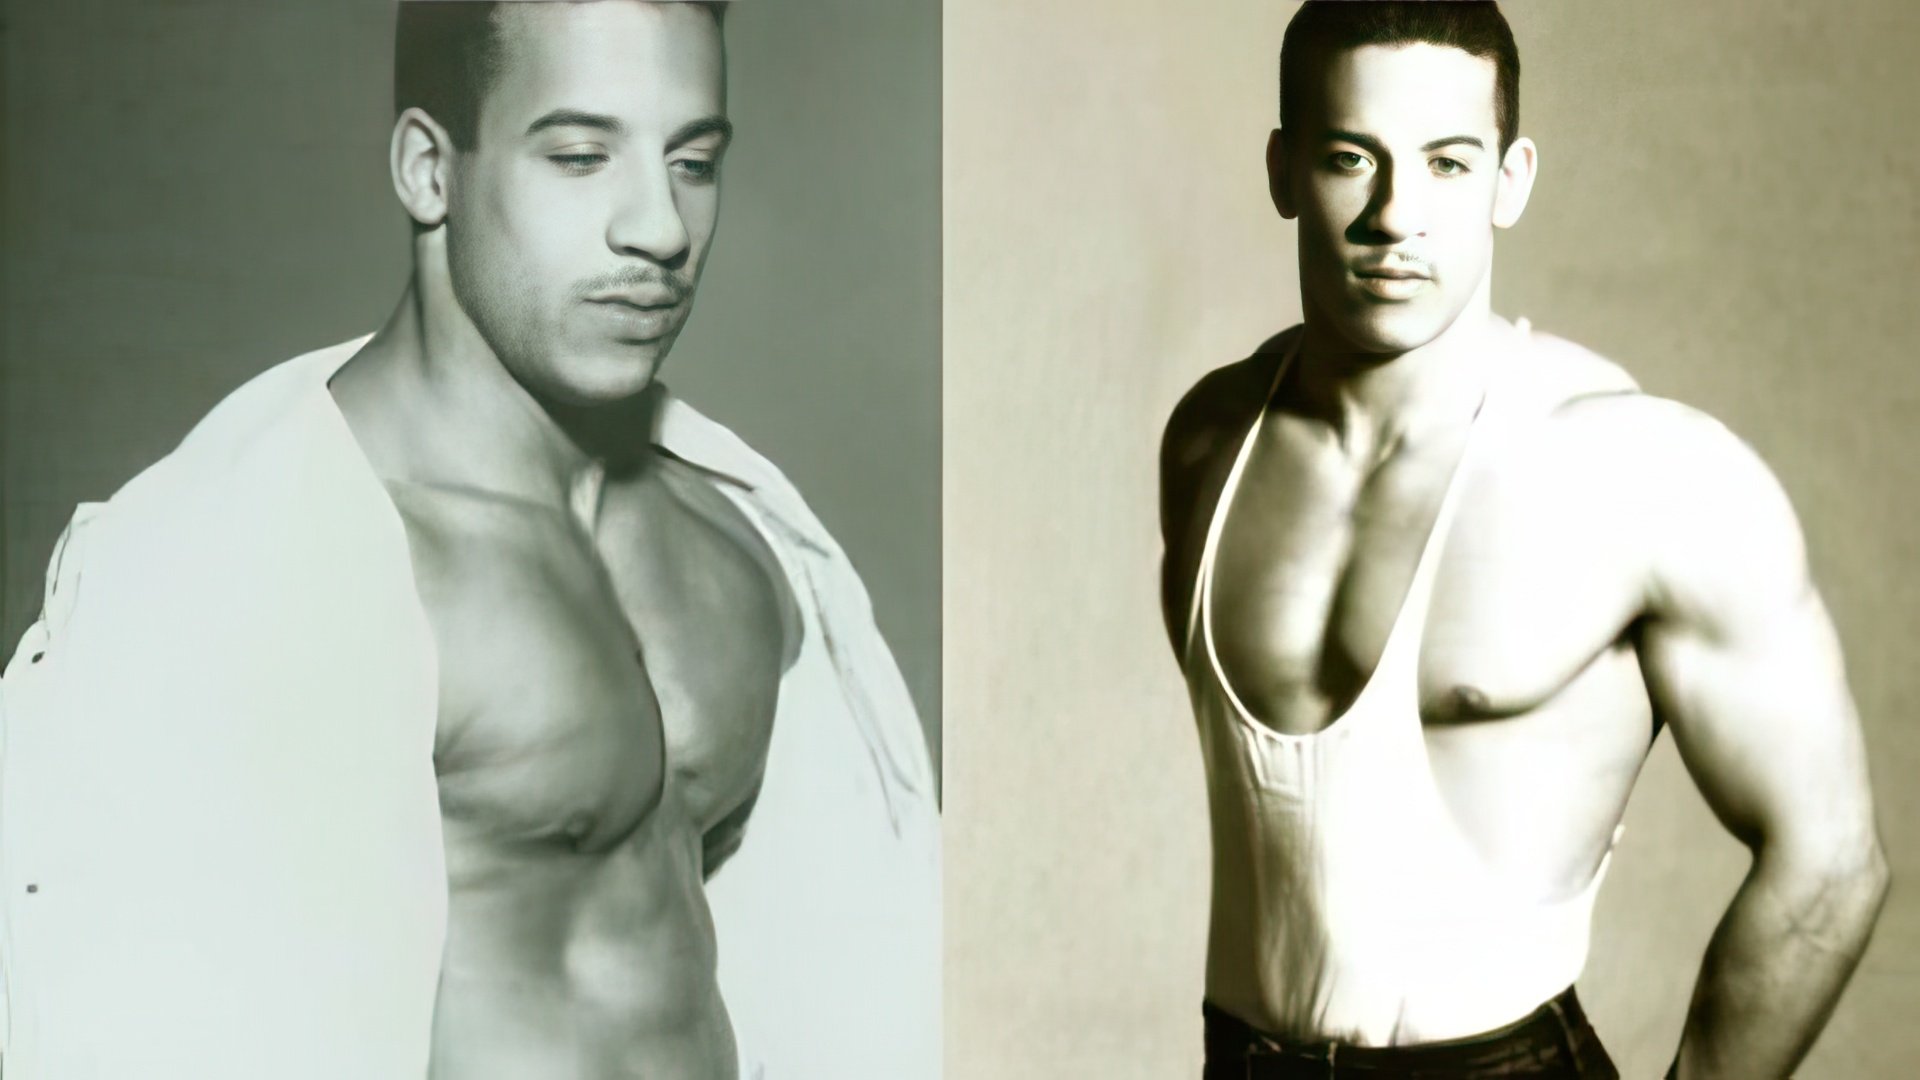 At 17, Vin Diesel started working as a bouncer in a nightclub